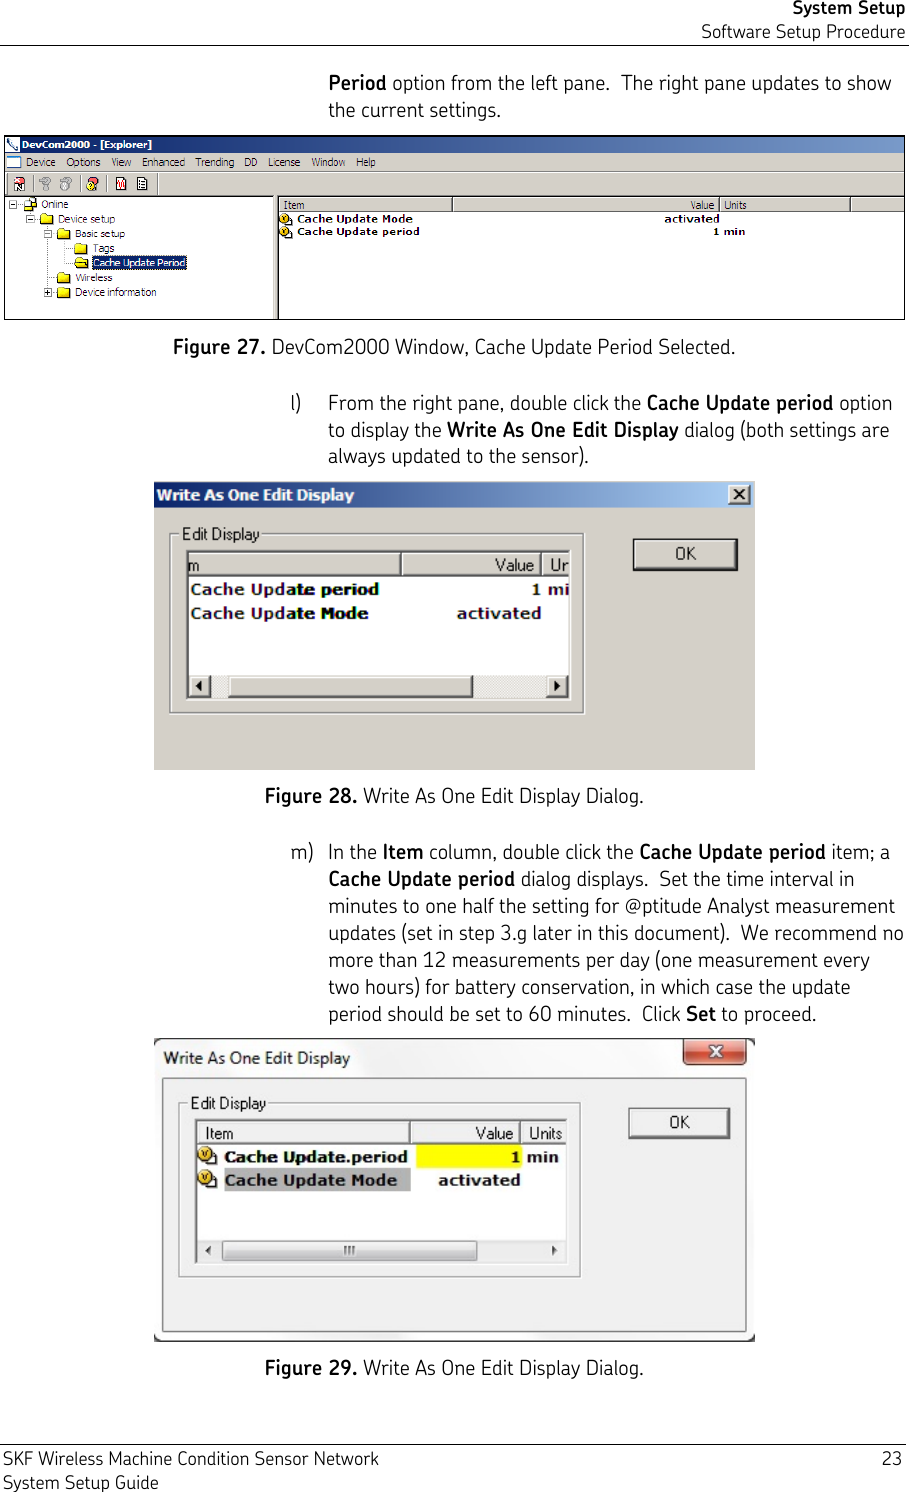 System Setup Software Setup Procedure SKF Wireless Machine Condition Sensor Network  23 System Setup Guide Period option from the left pane.  The right pane updates to show the current settings.  Figure 27. DevCom2000 Window, Cache Update Period Selected. l) From the right pane, double click the Cache Update period option to display the Write As One Edit Display dialog (both settings are always updated to the sensor).  Figure 28. Write As One Edit Display Dialog. m) In the Item column, double click the Cache Update period item; a Cache Update period dialog displays.  Set the time interval in minutes to one half the setting for @ptitude Analyst measurement updates (set in step 3.g later in this document).  We recommend no more than 12 measurements per day (one measurement every two hours) for battery conservation, in which case the update period should be set to 60 minutes.  Click Set to proceed.  Figure 29. Write As One Edit Display Dialog. 